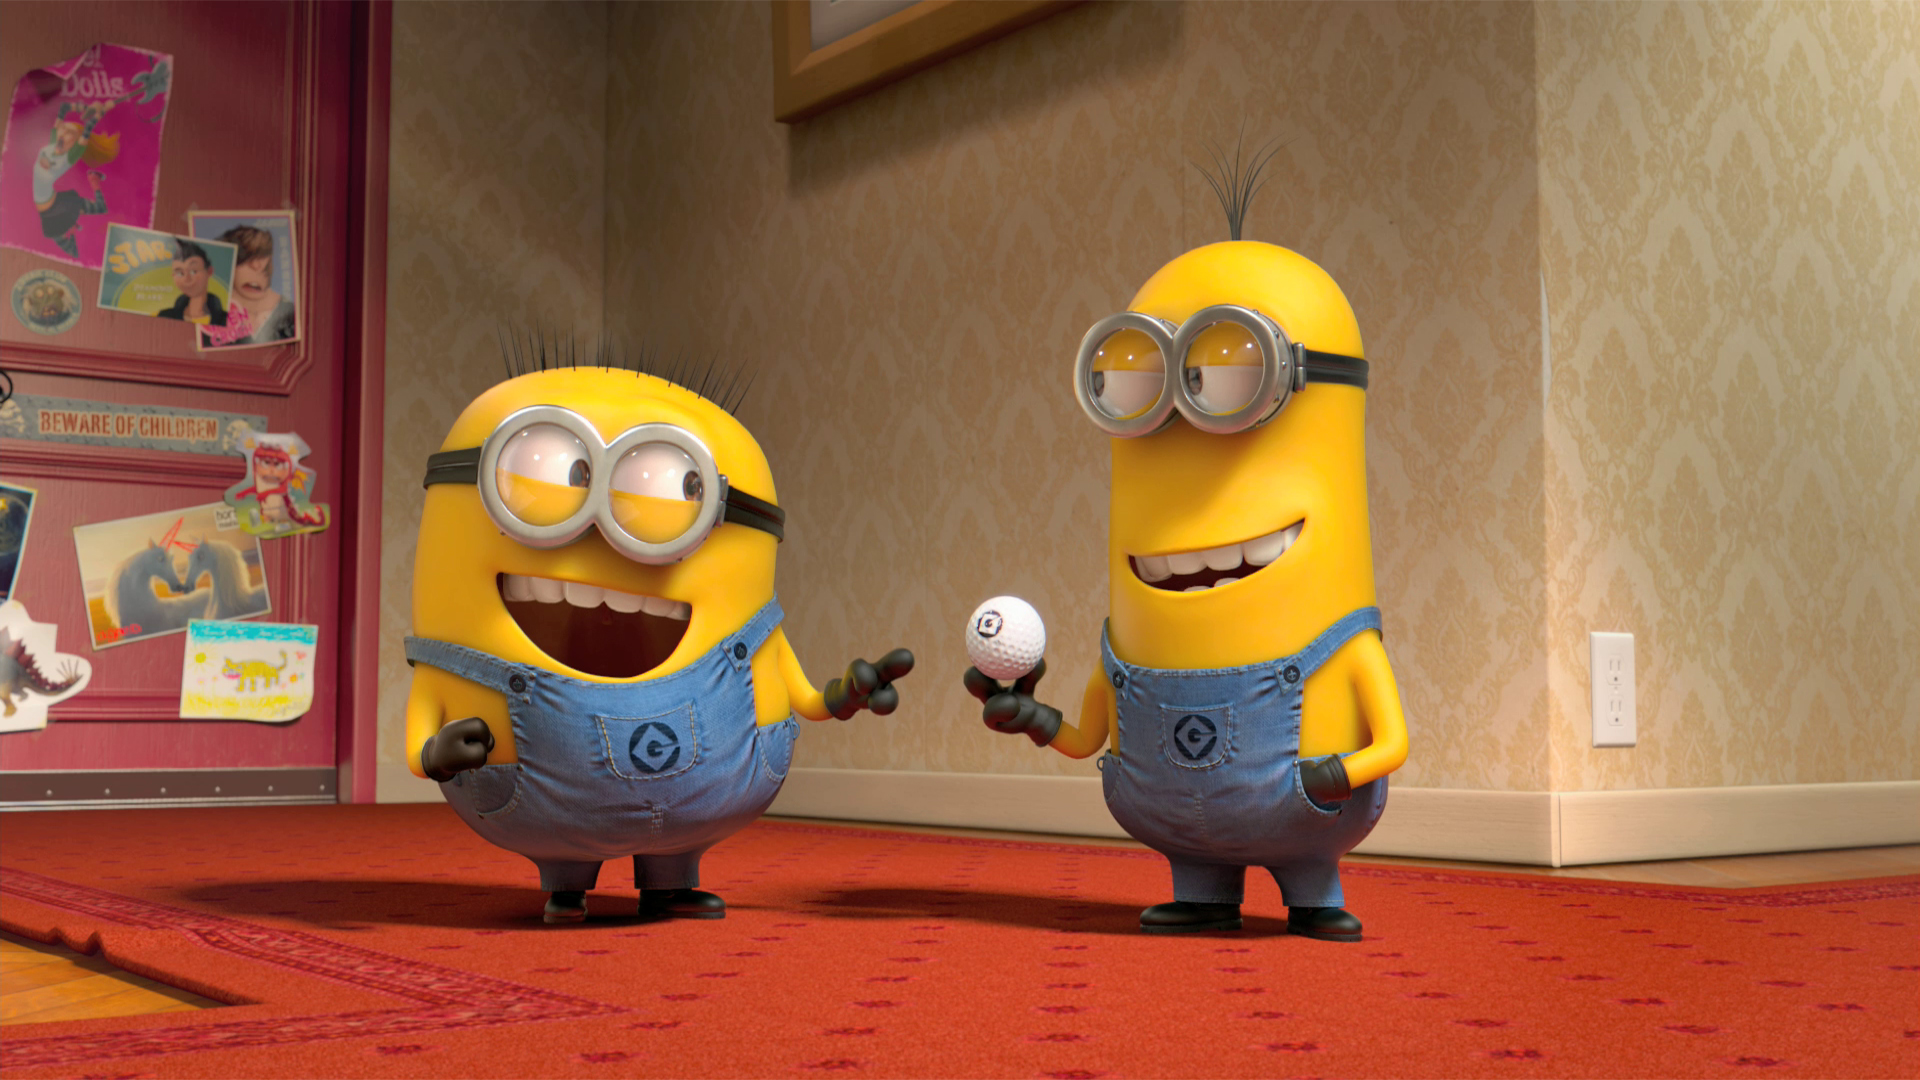 HD Stills Wallpaper From Despicable Me Movie